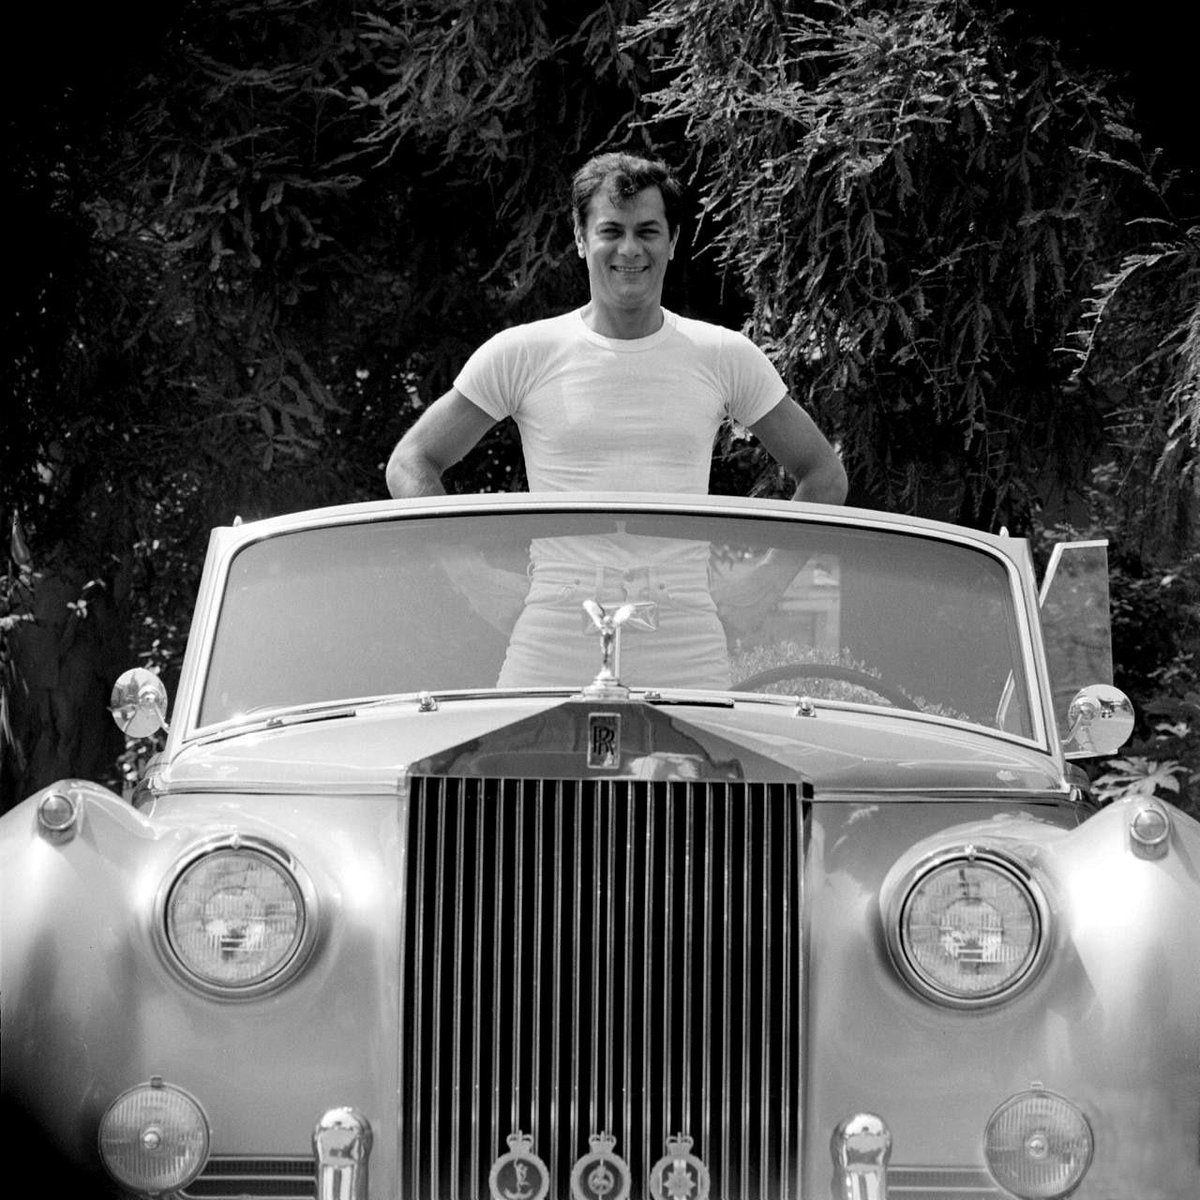 Fascinating Historical Picture of Tony Curtis in 1961 